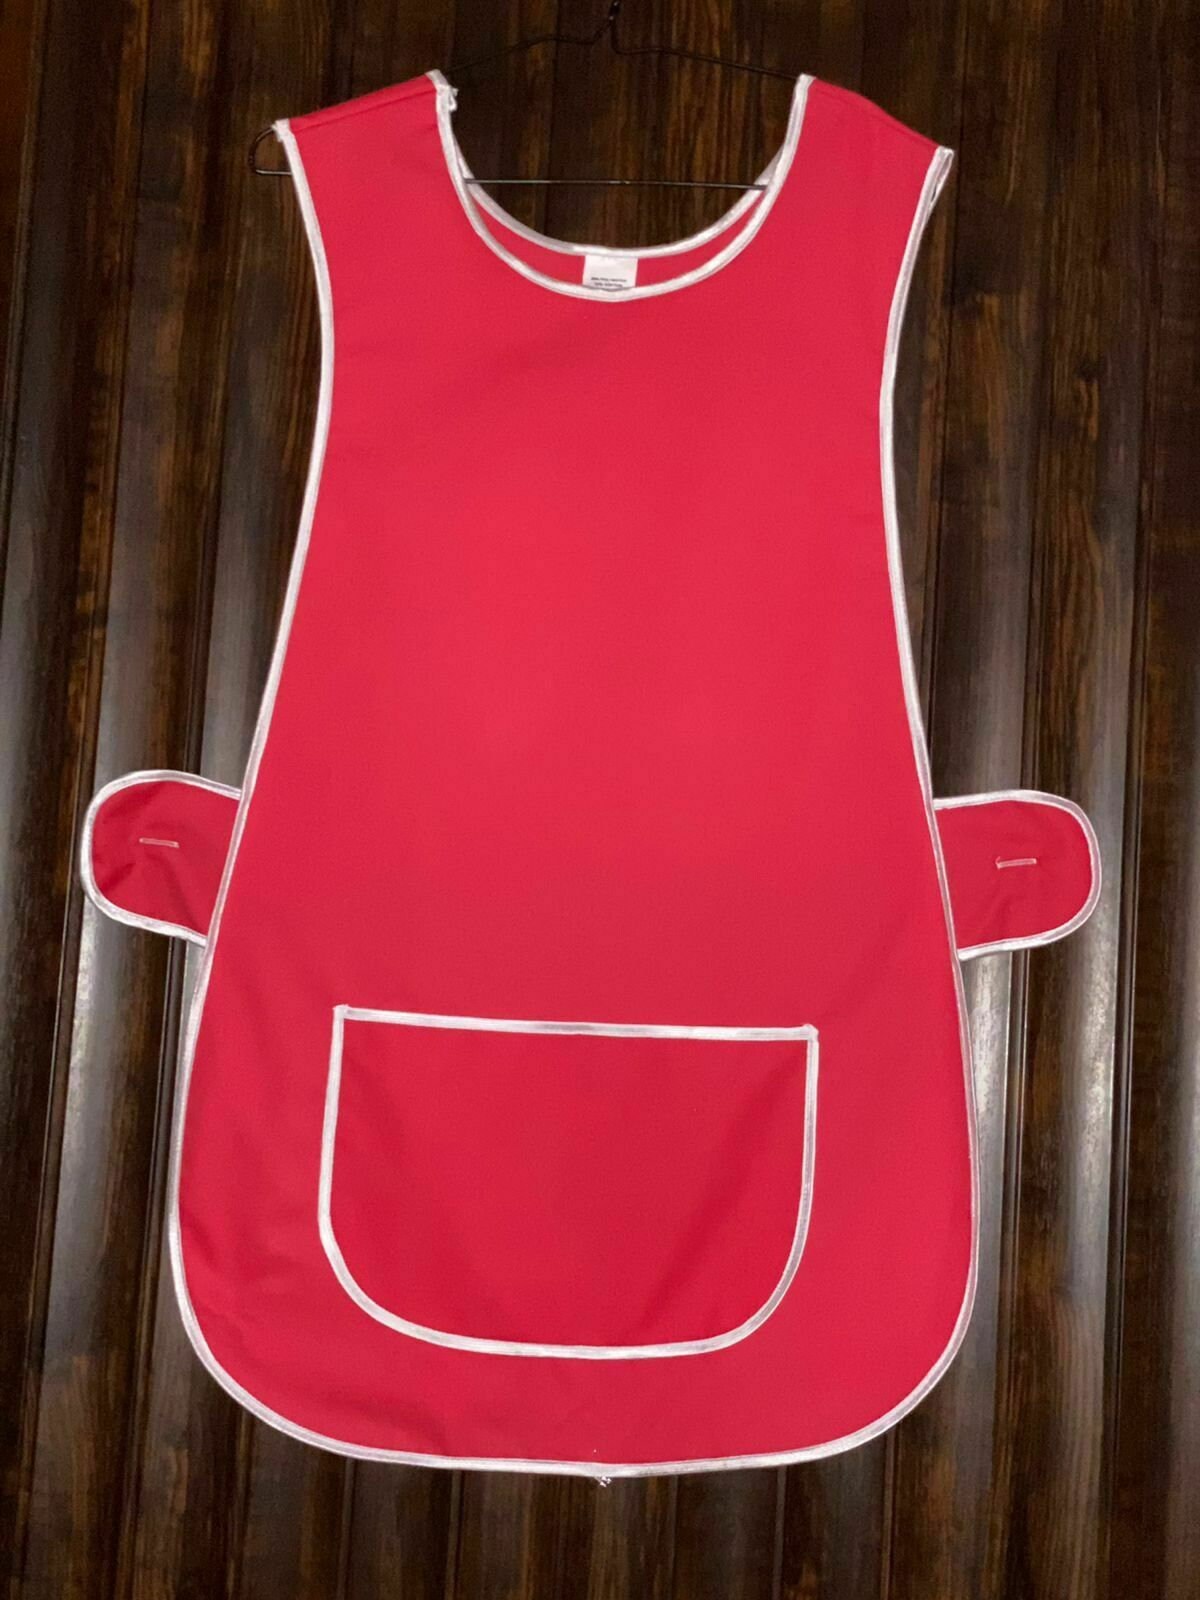 Tabard Apron With Pockets Overall Kitchen Catering Cleaning Workwear Uniform 